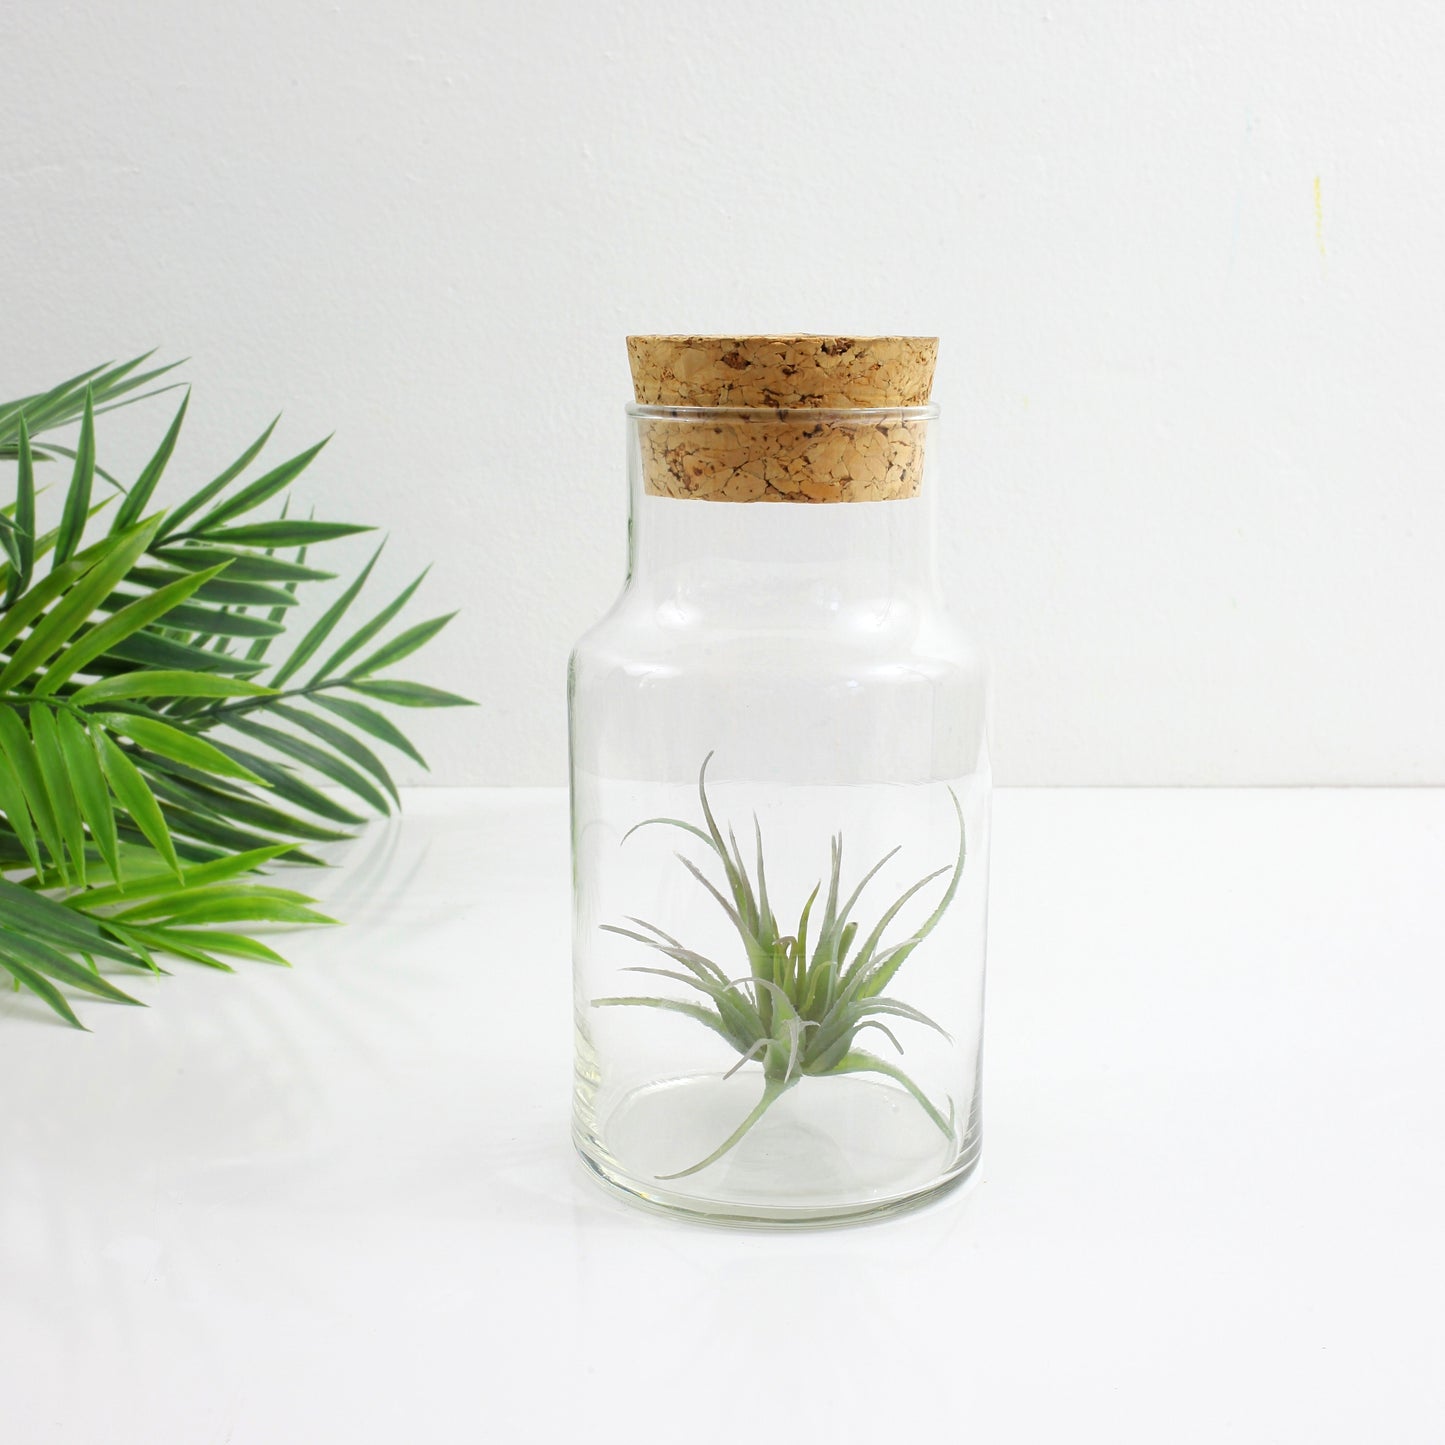 SOLD - Vintage Glass Apothecary Jar with Cork Lid